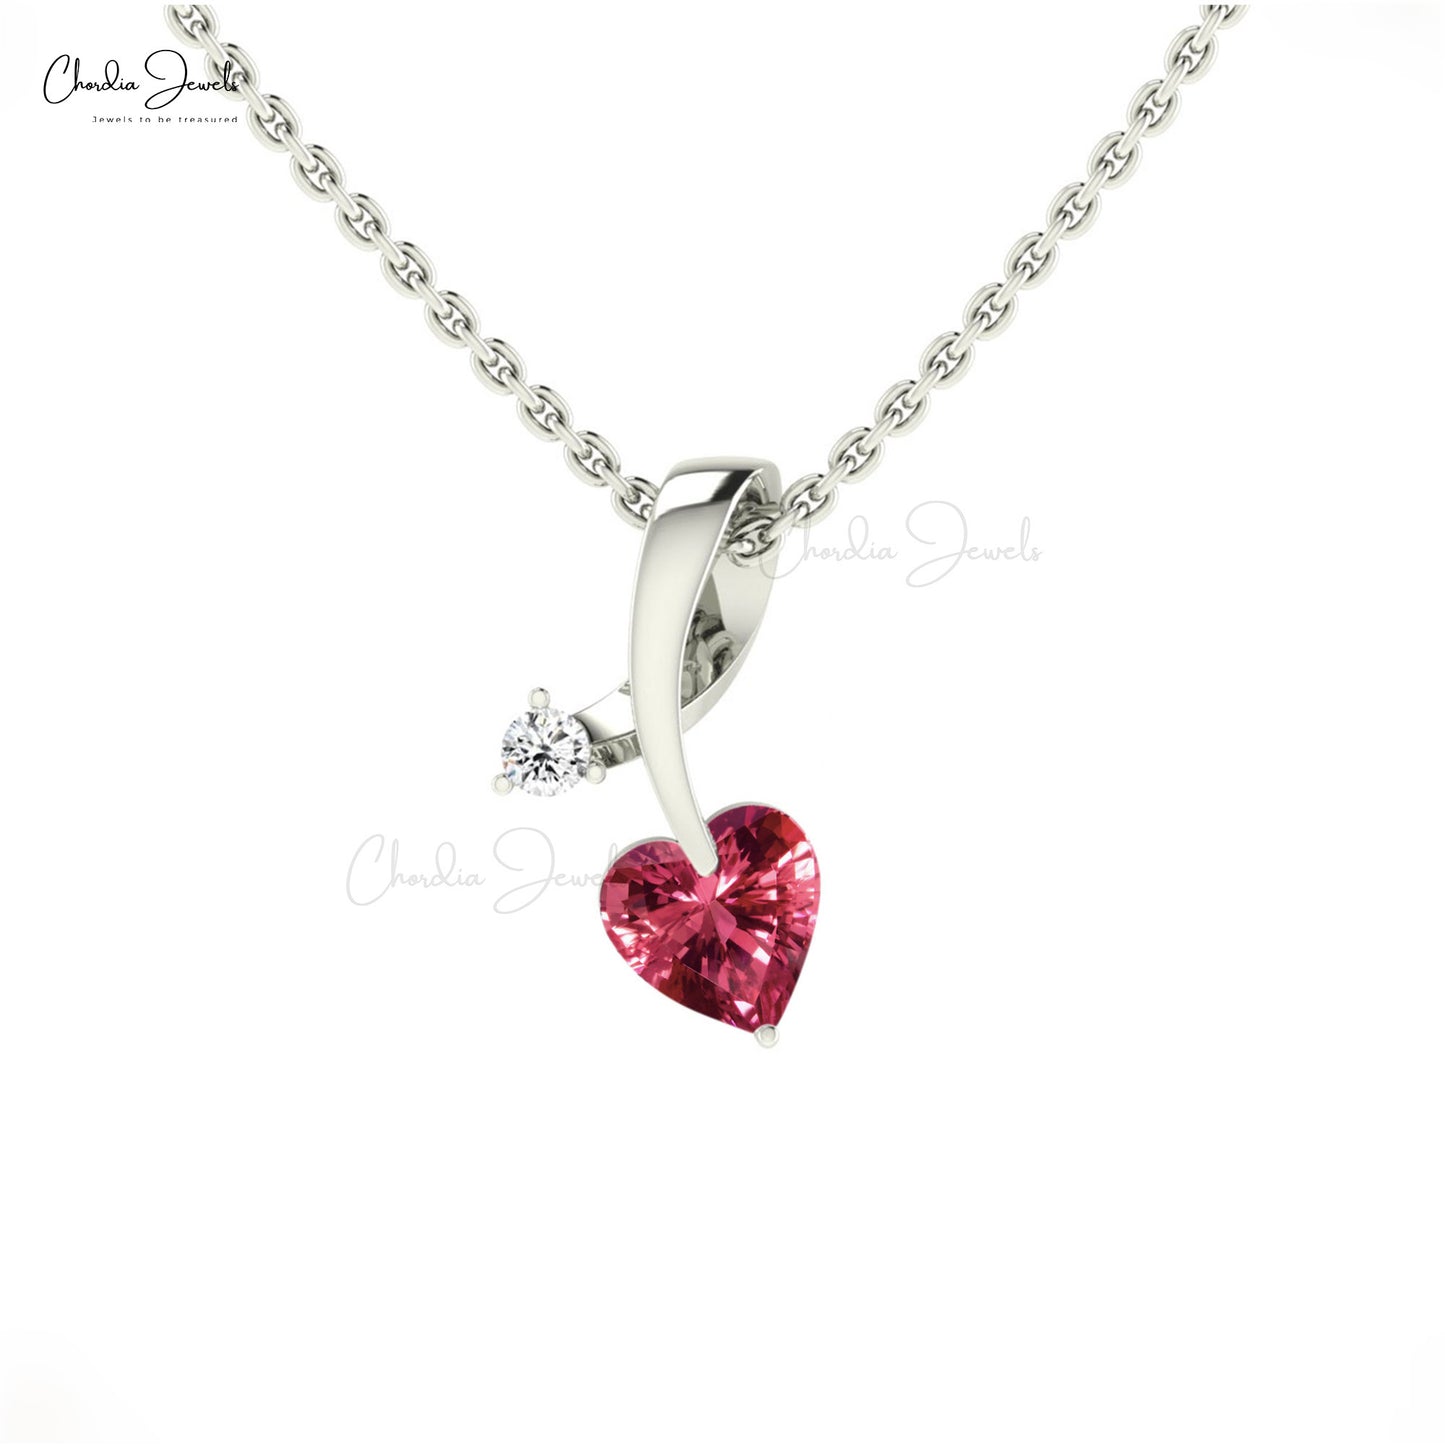 Load image into Gallery viewer, AAA Pink Tourmaline 5mm Heart Cut Pendant 14k Solid Gold Diamond Pendant For Her
